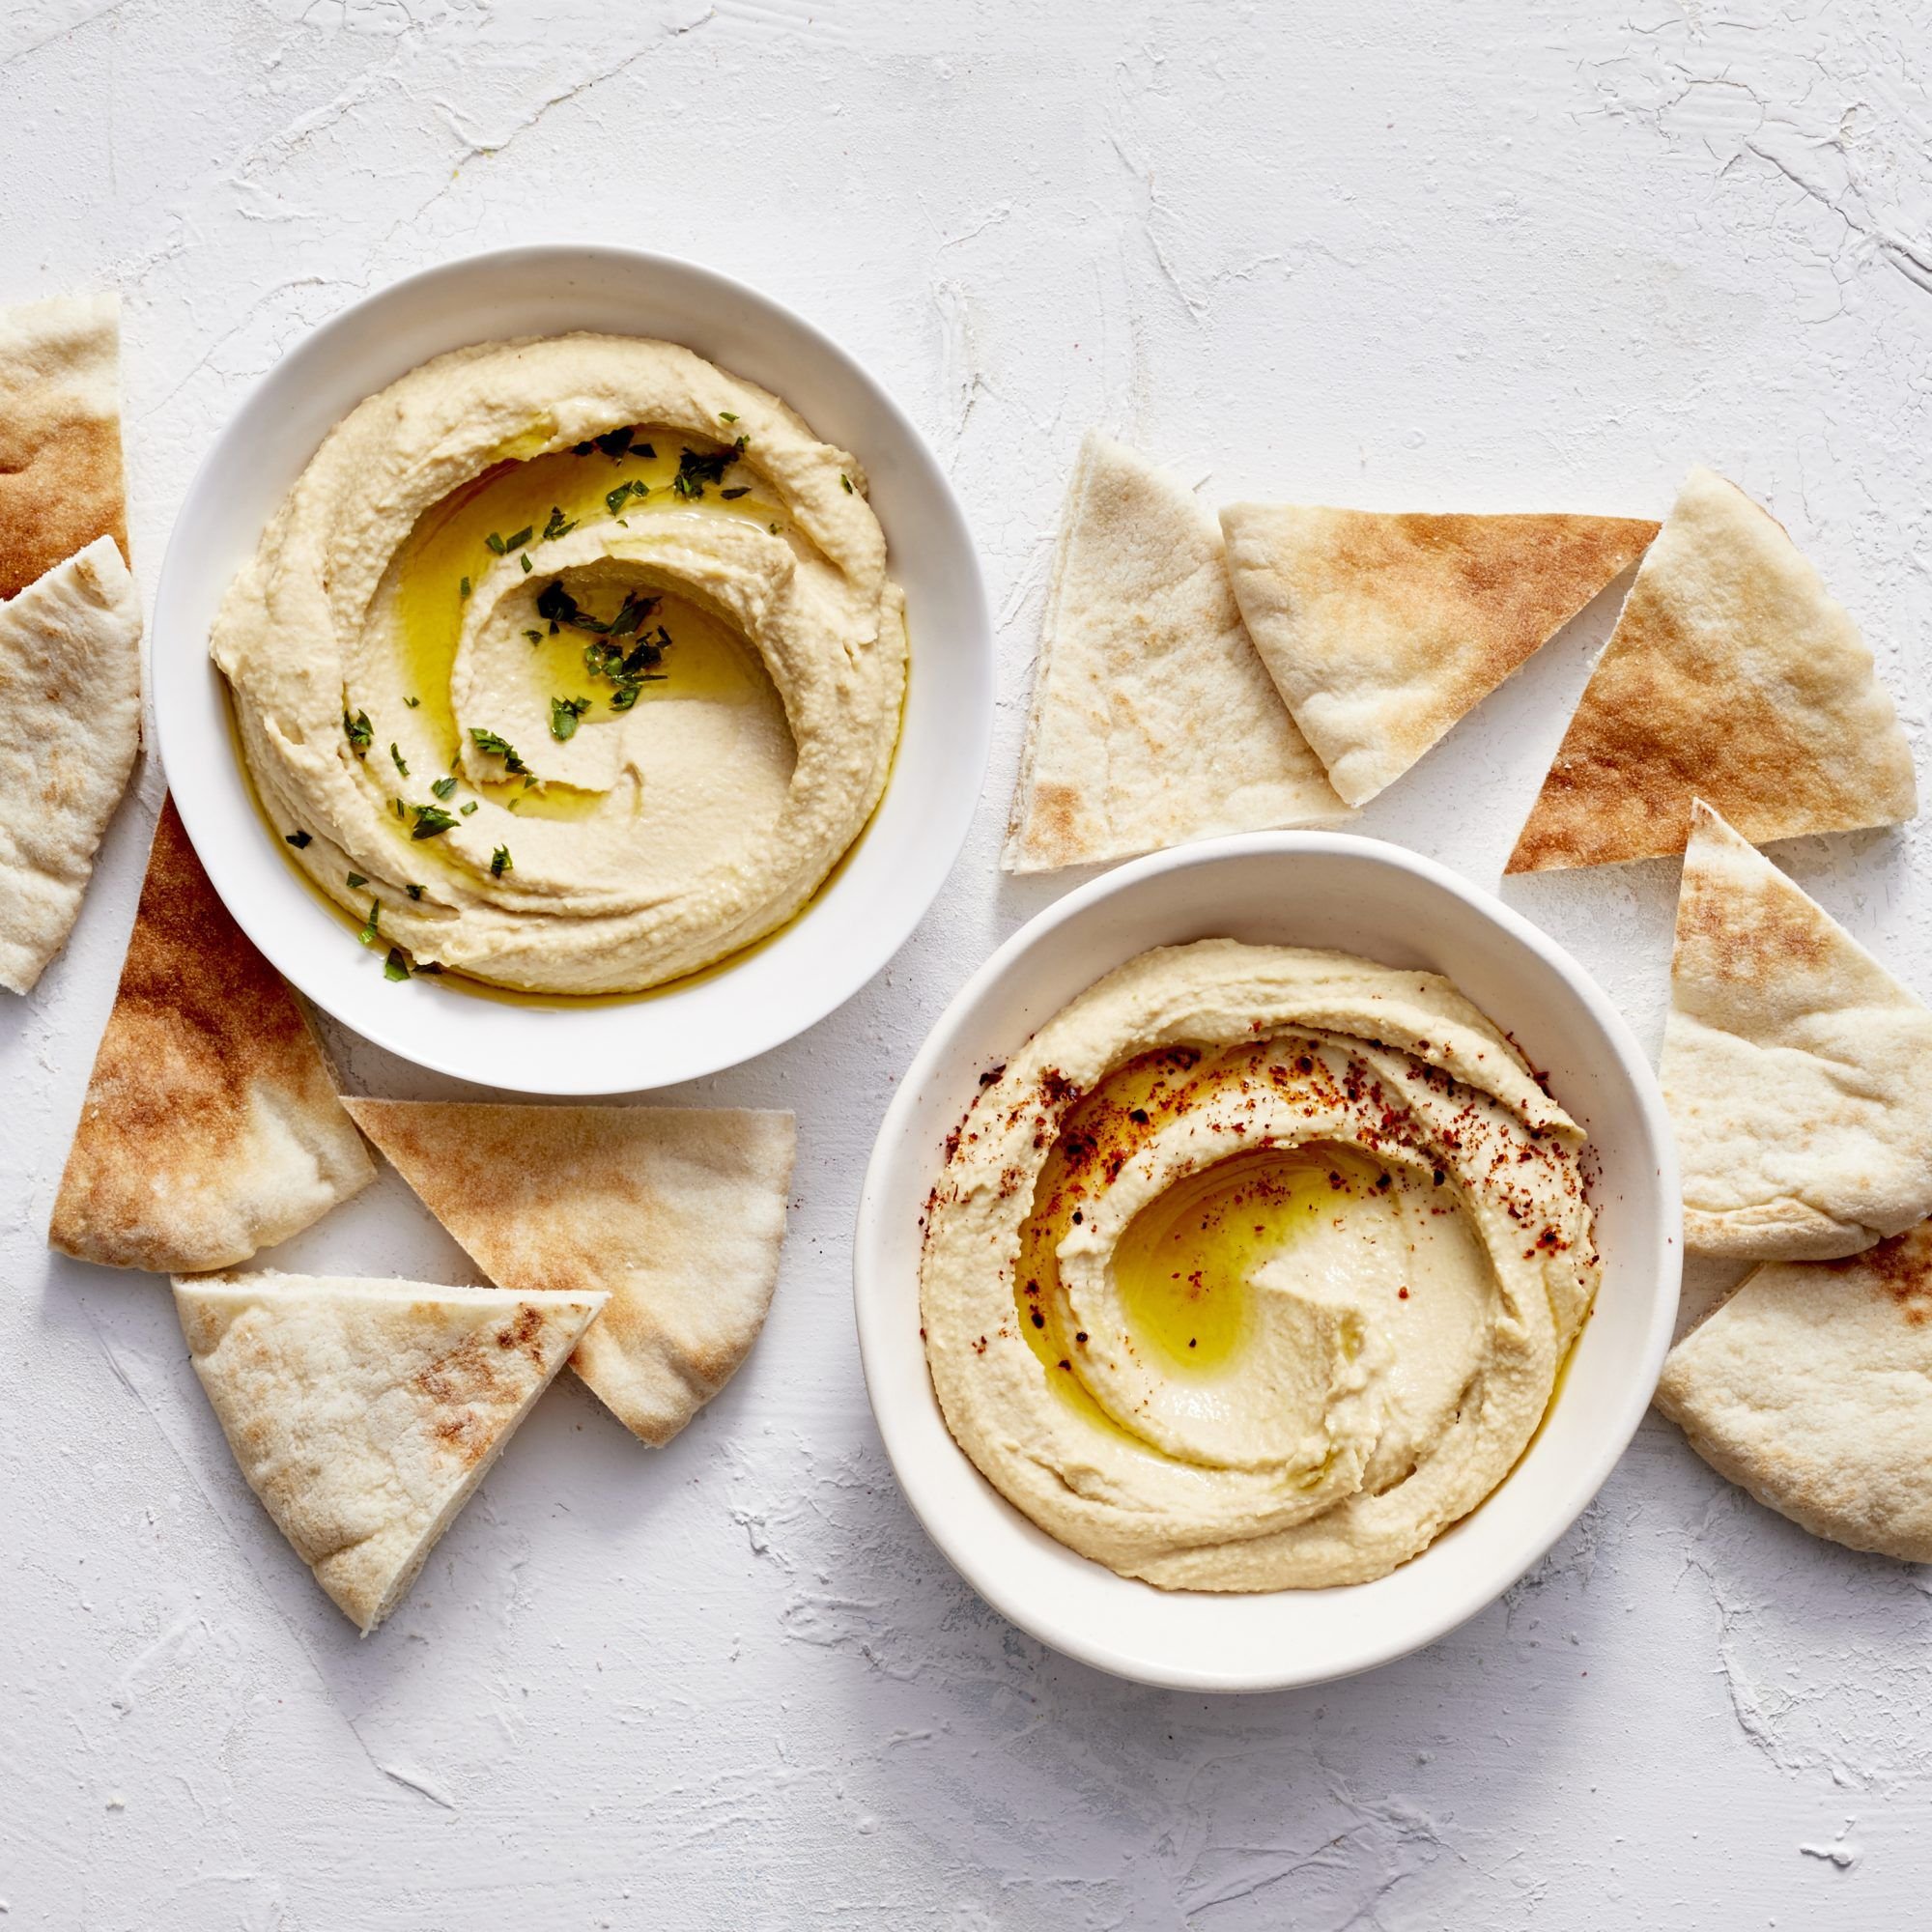 Hummus Nutrition: What You Should Know